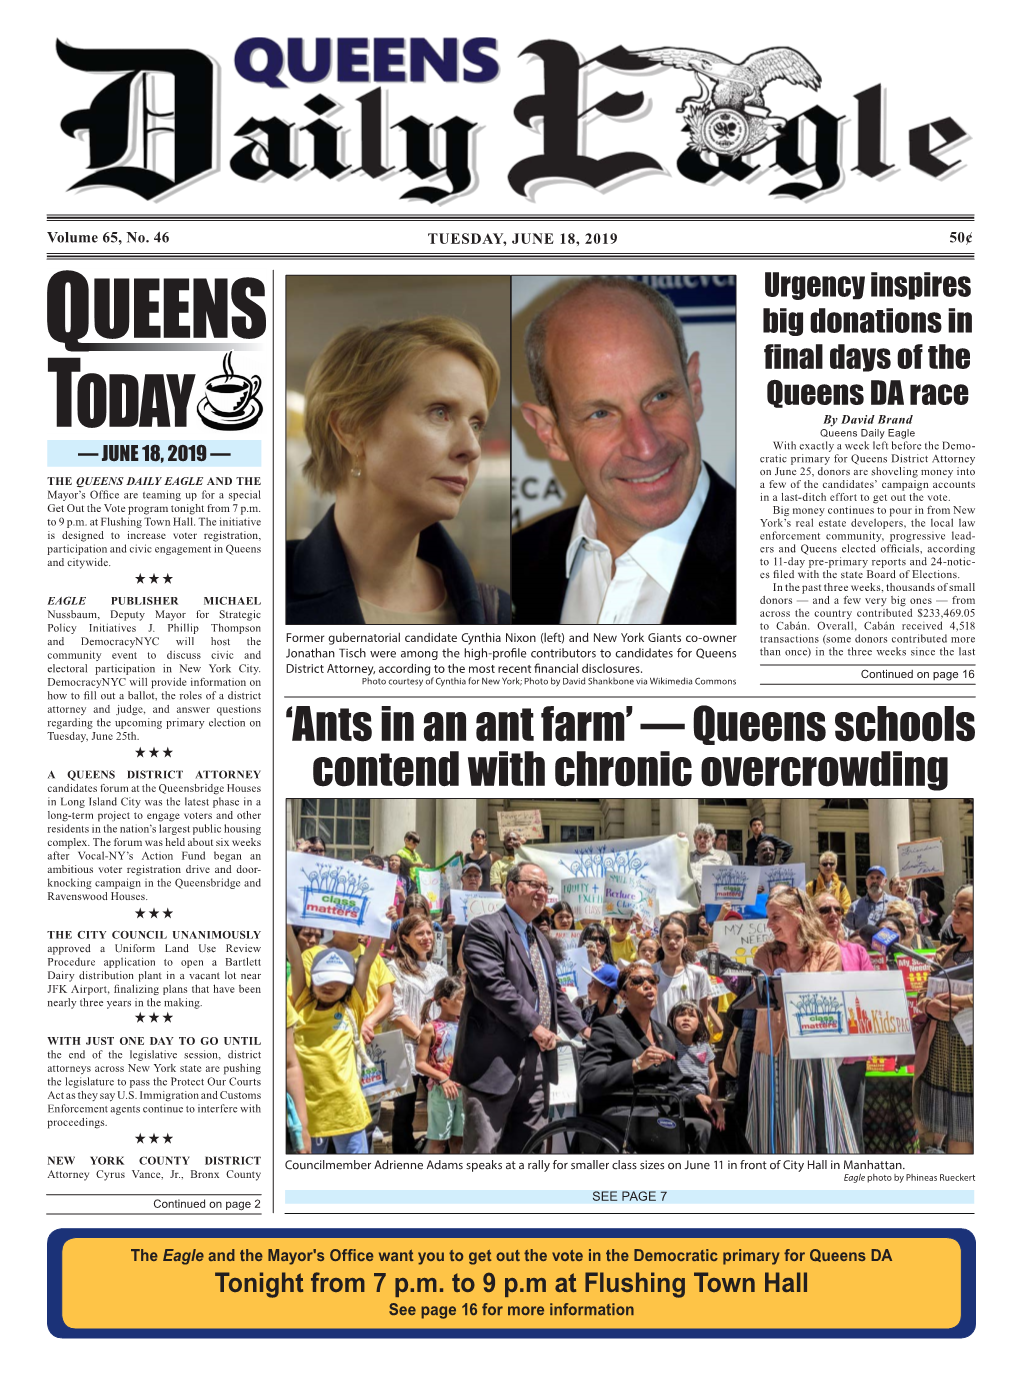 Queens Schools Contend with Chronic Overcrowding by Phineas Rueckert Cil Report on Overcrowding